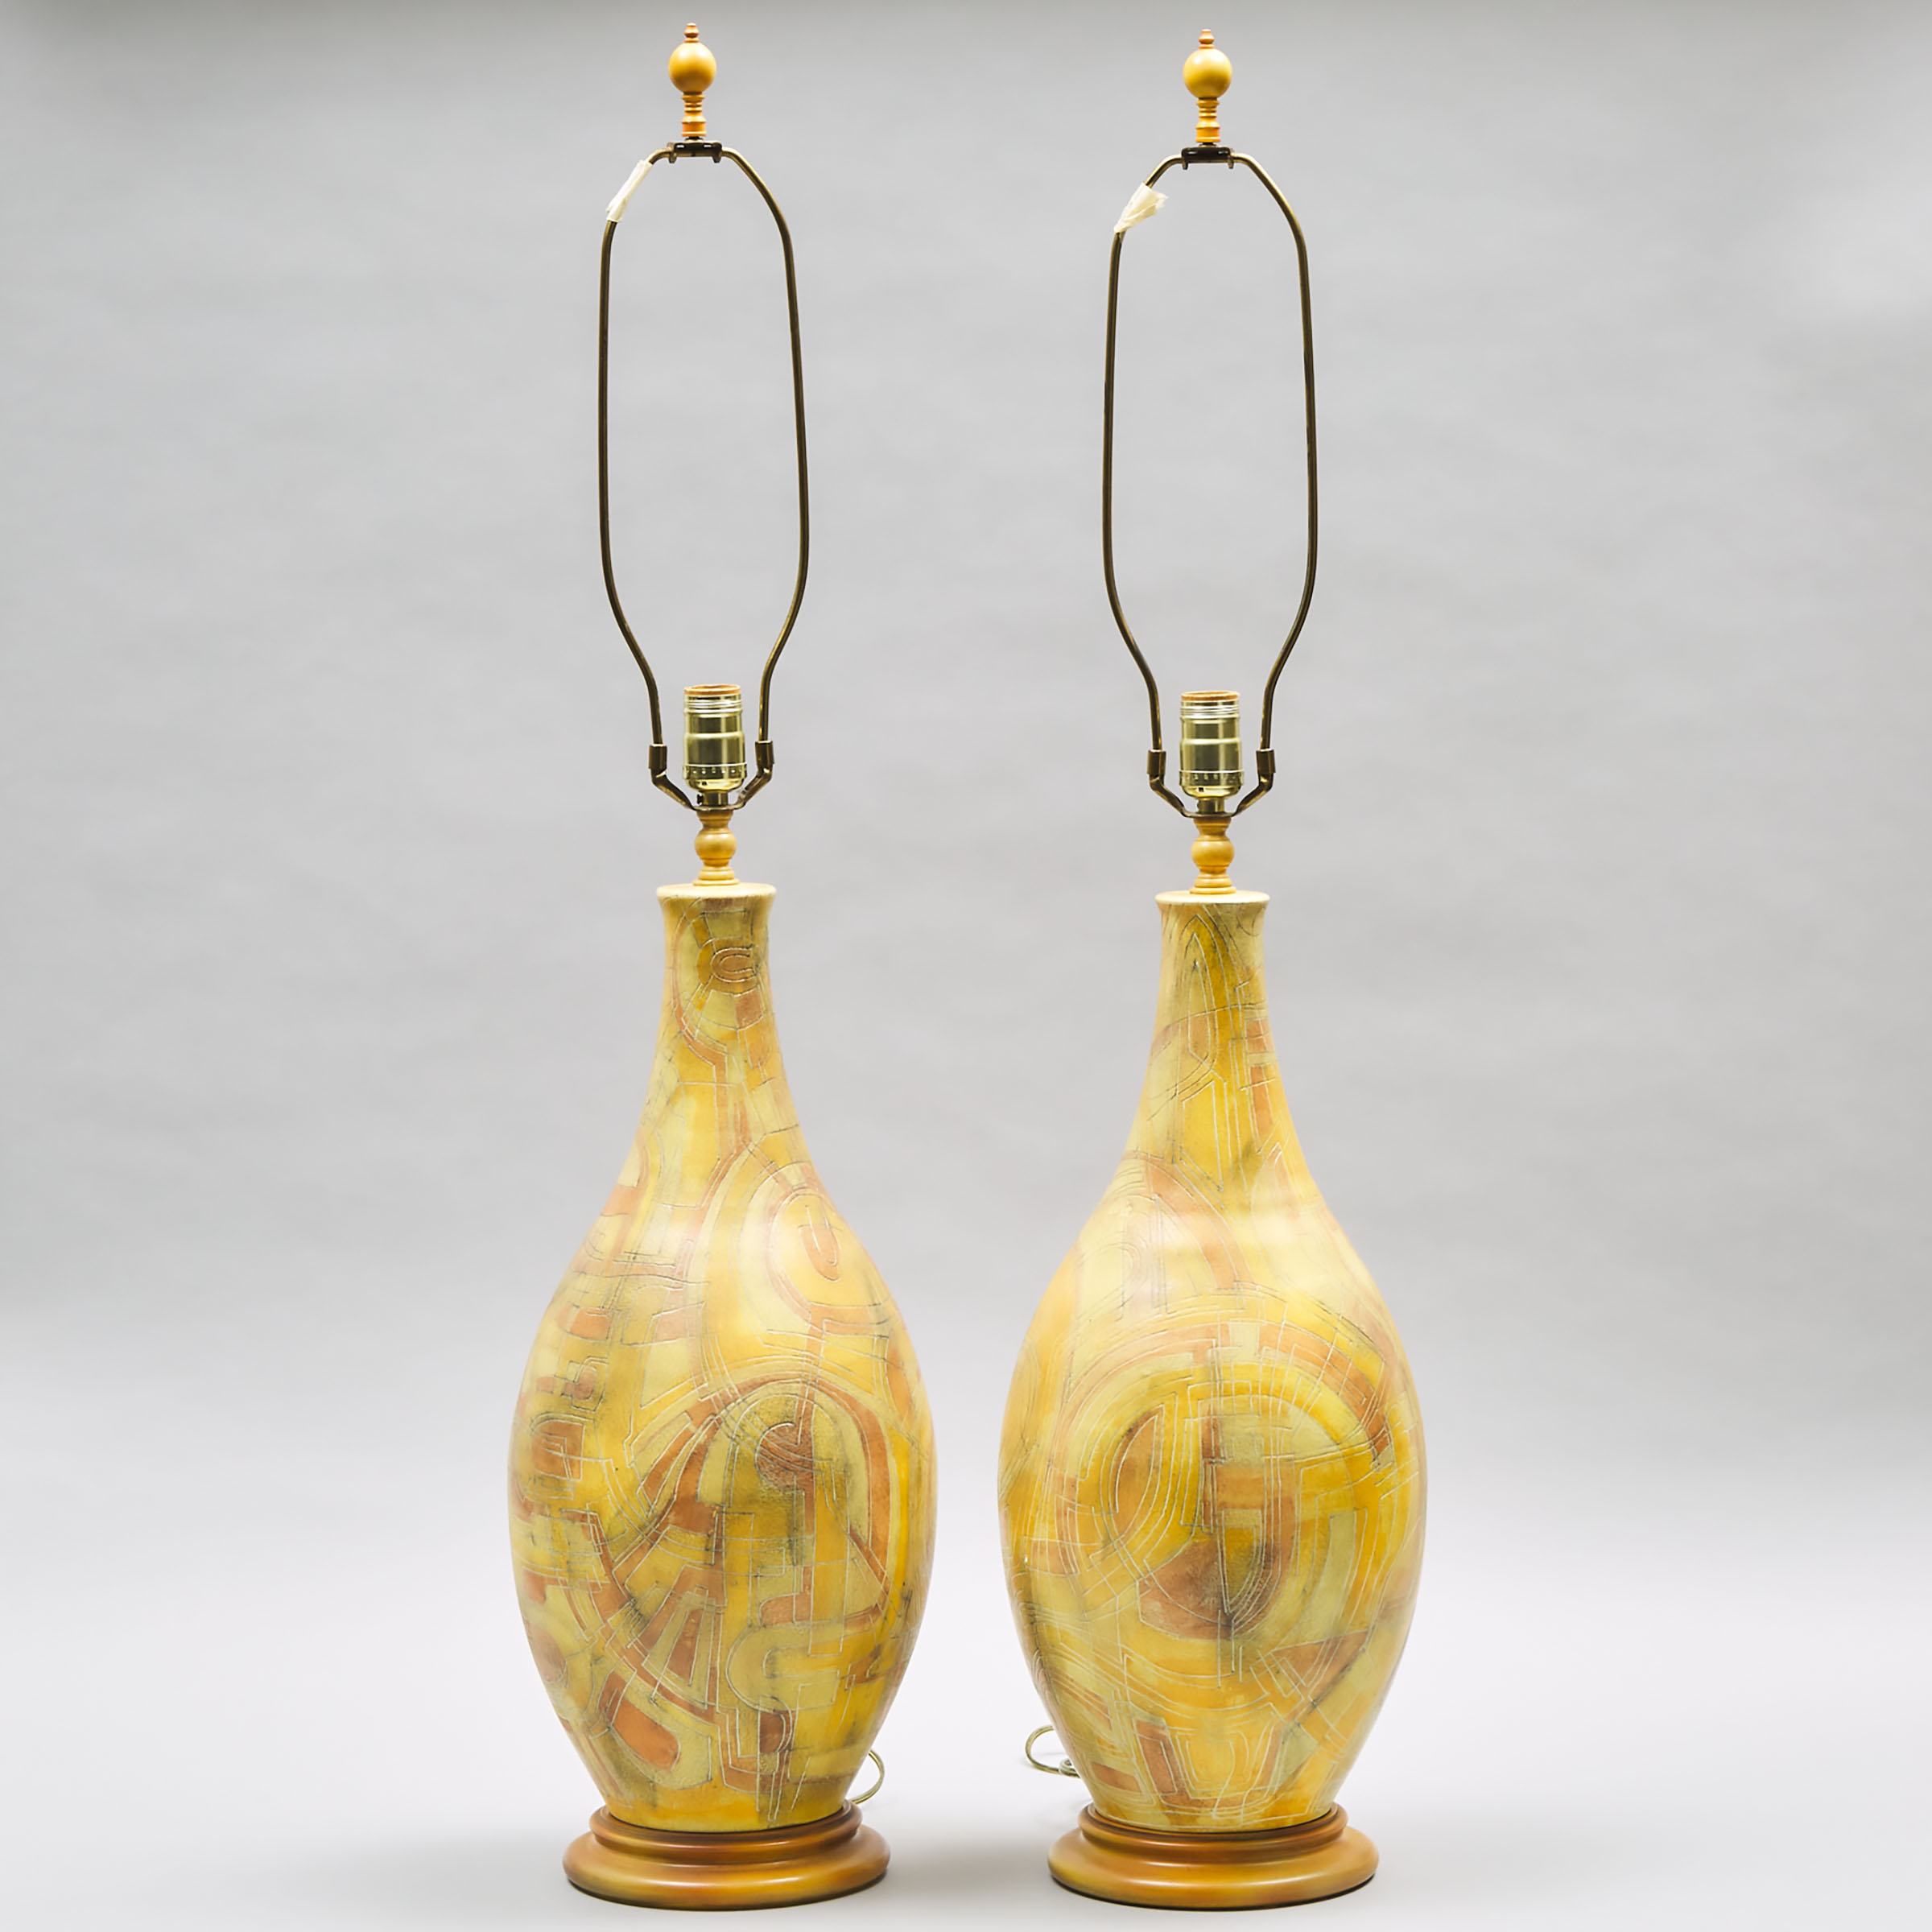 Pair of Brooklin Pottery Table Lamps, Theo and Susan Harlander, c.1975-80